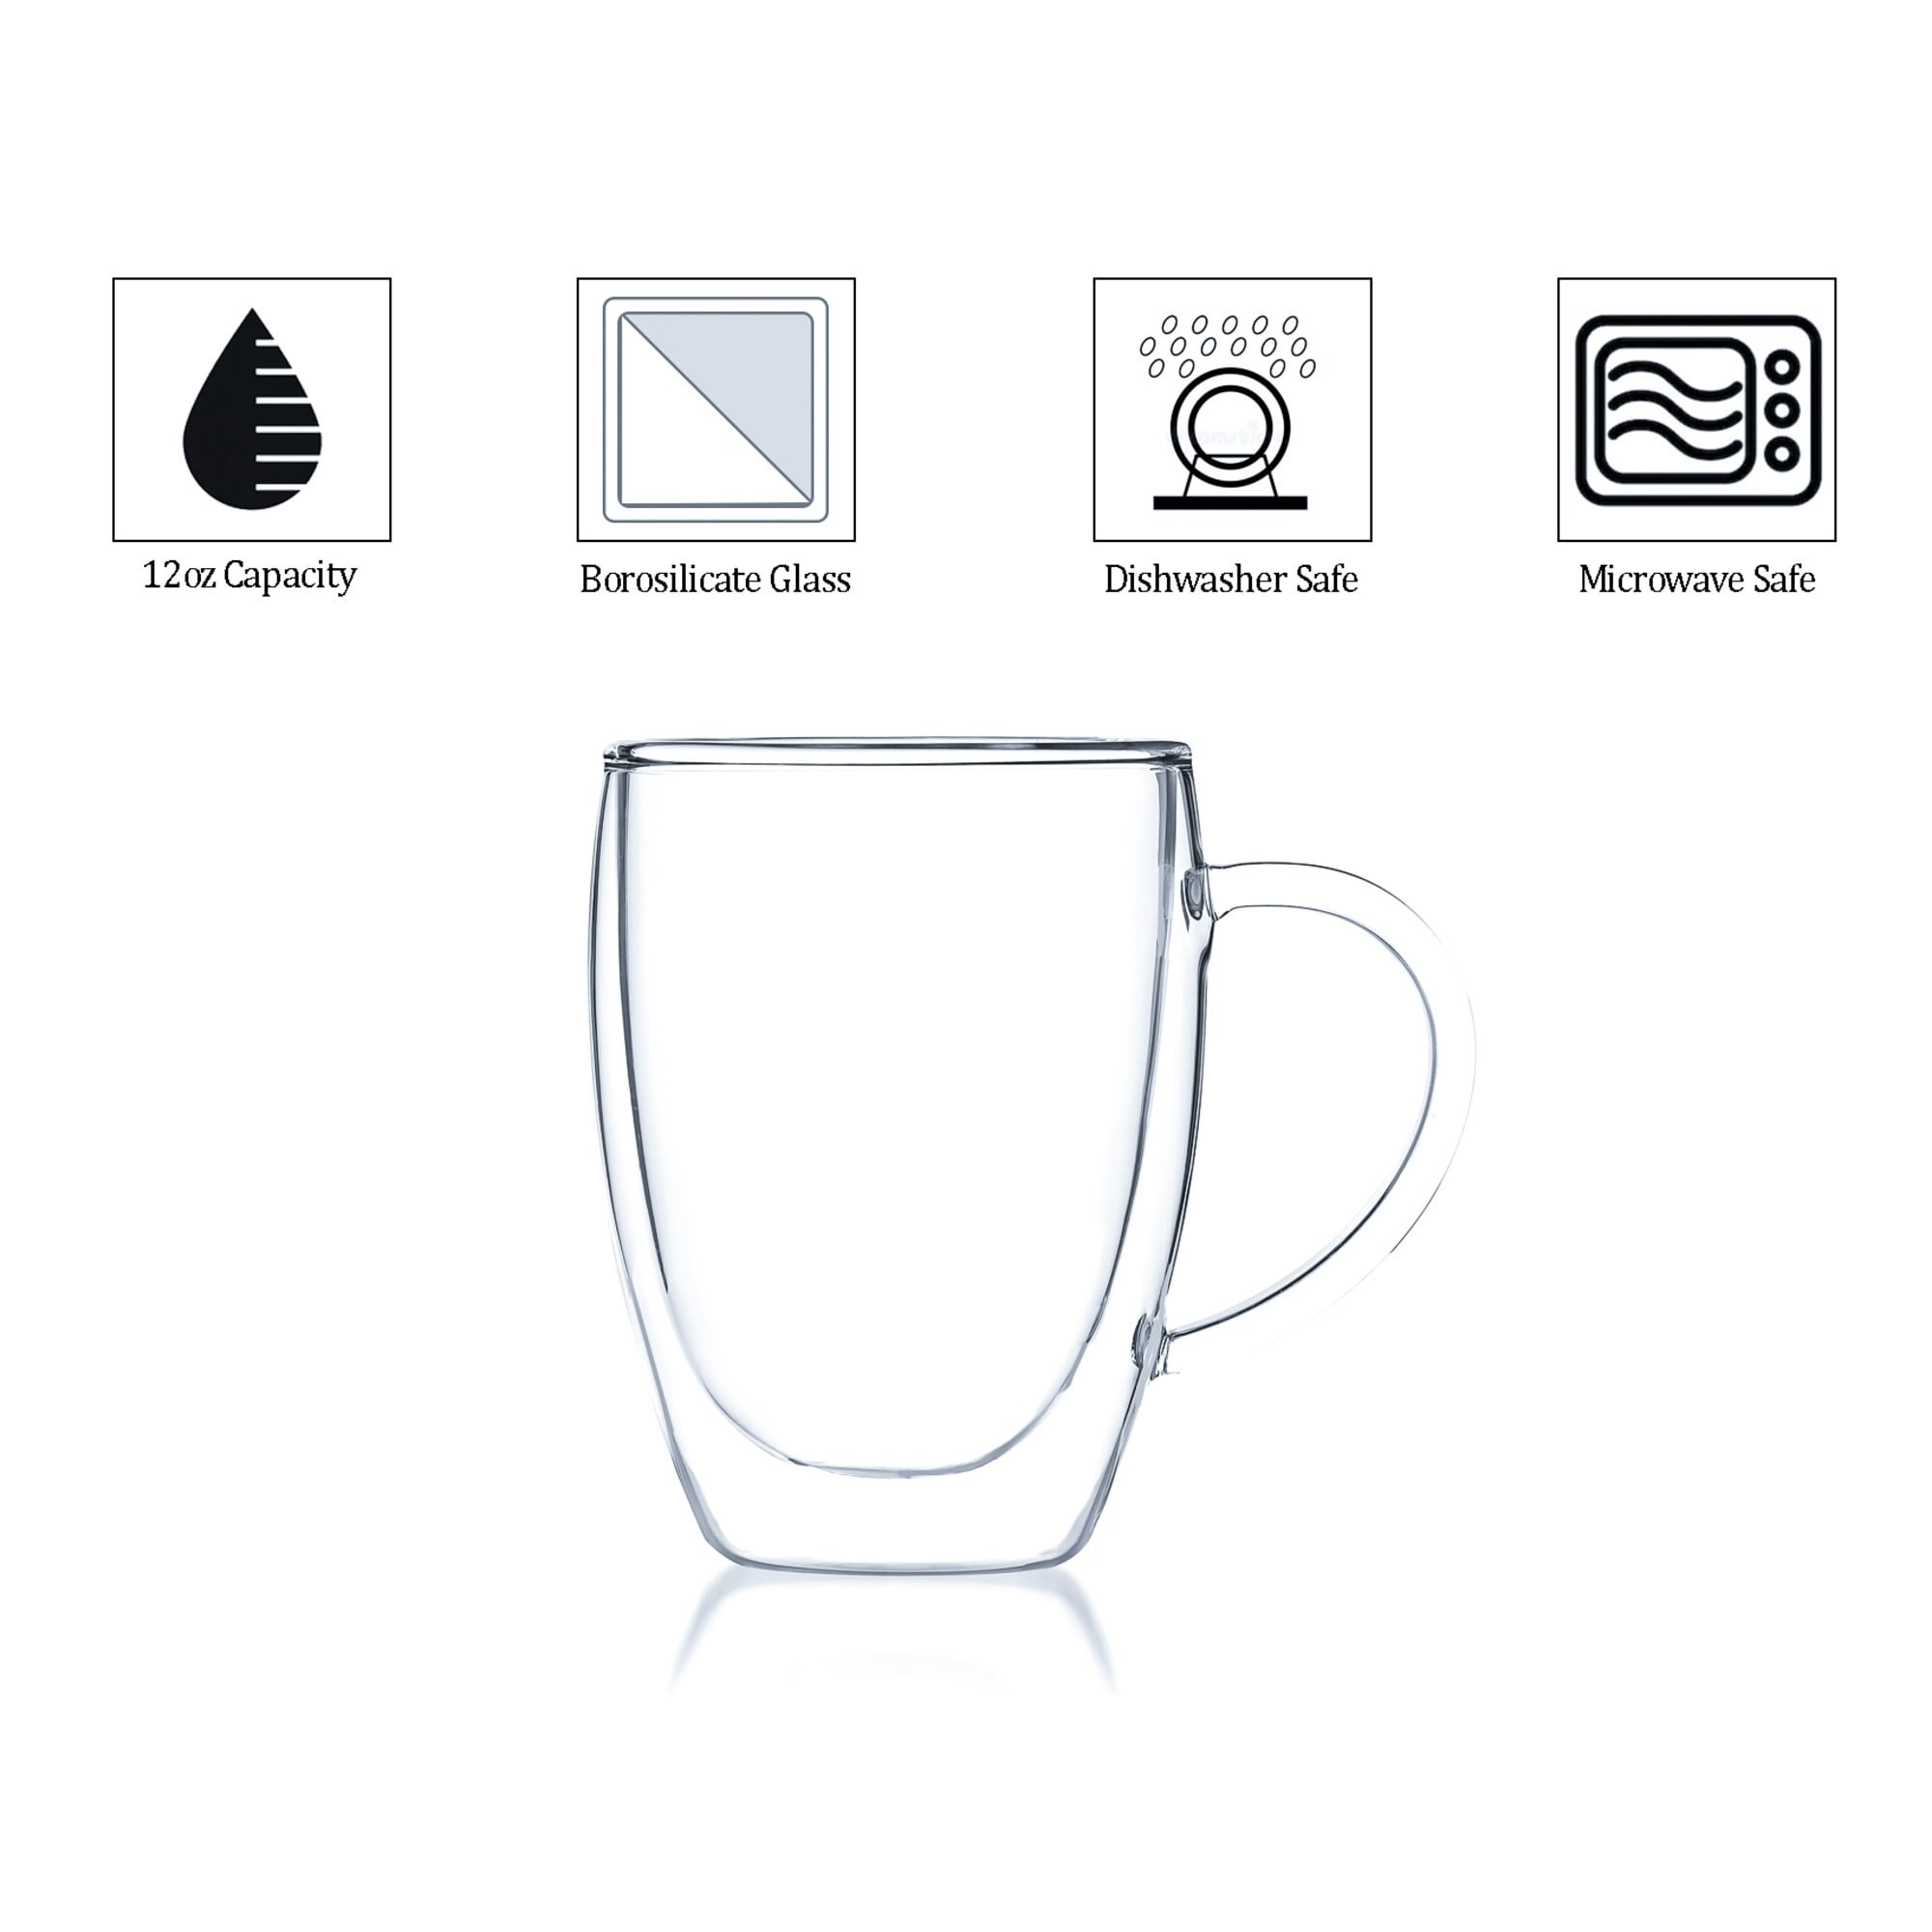 https://ak1.ostkcdn.com/images/products/14427905/JavaFly-Clear-Glass-12-ounce-Double-walled-Thermo-Bistro-Mug-with-Handle-Set-of-2-0200b6f8-7ffc-4fae-837a-d52b343e56da.jpg